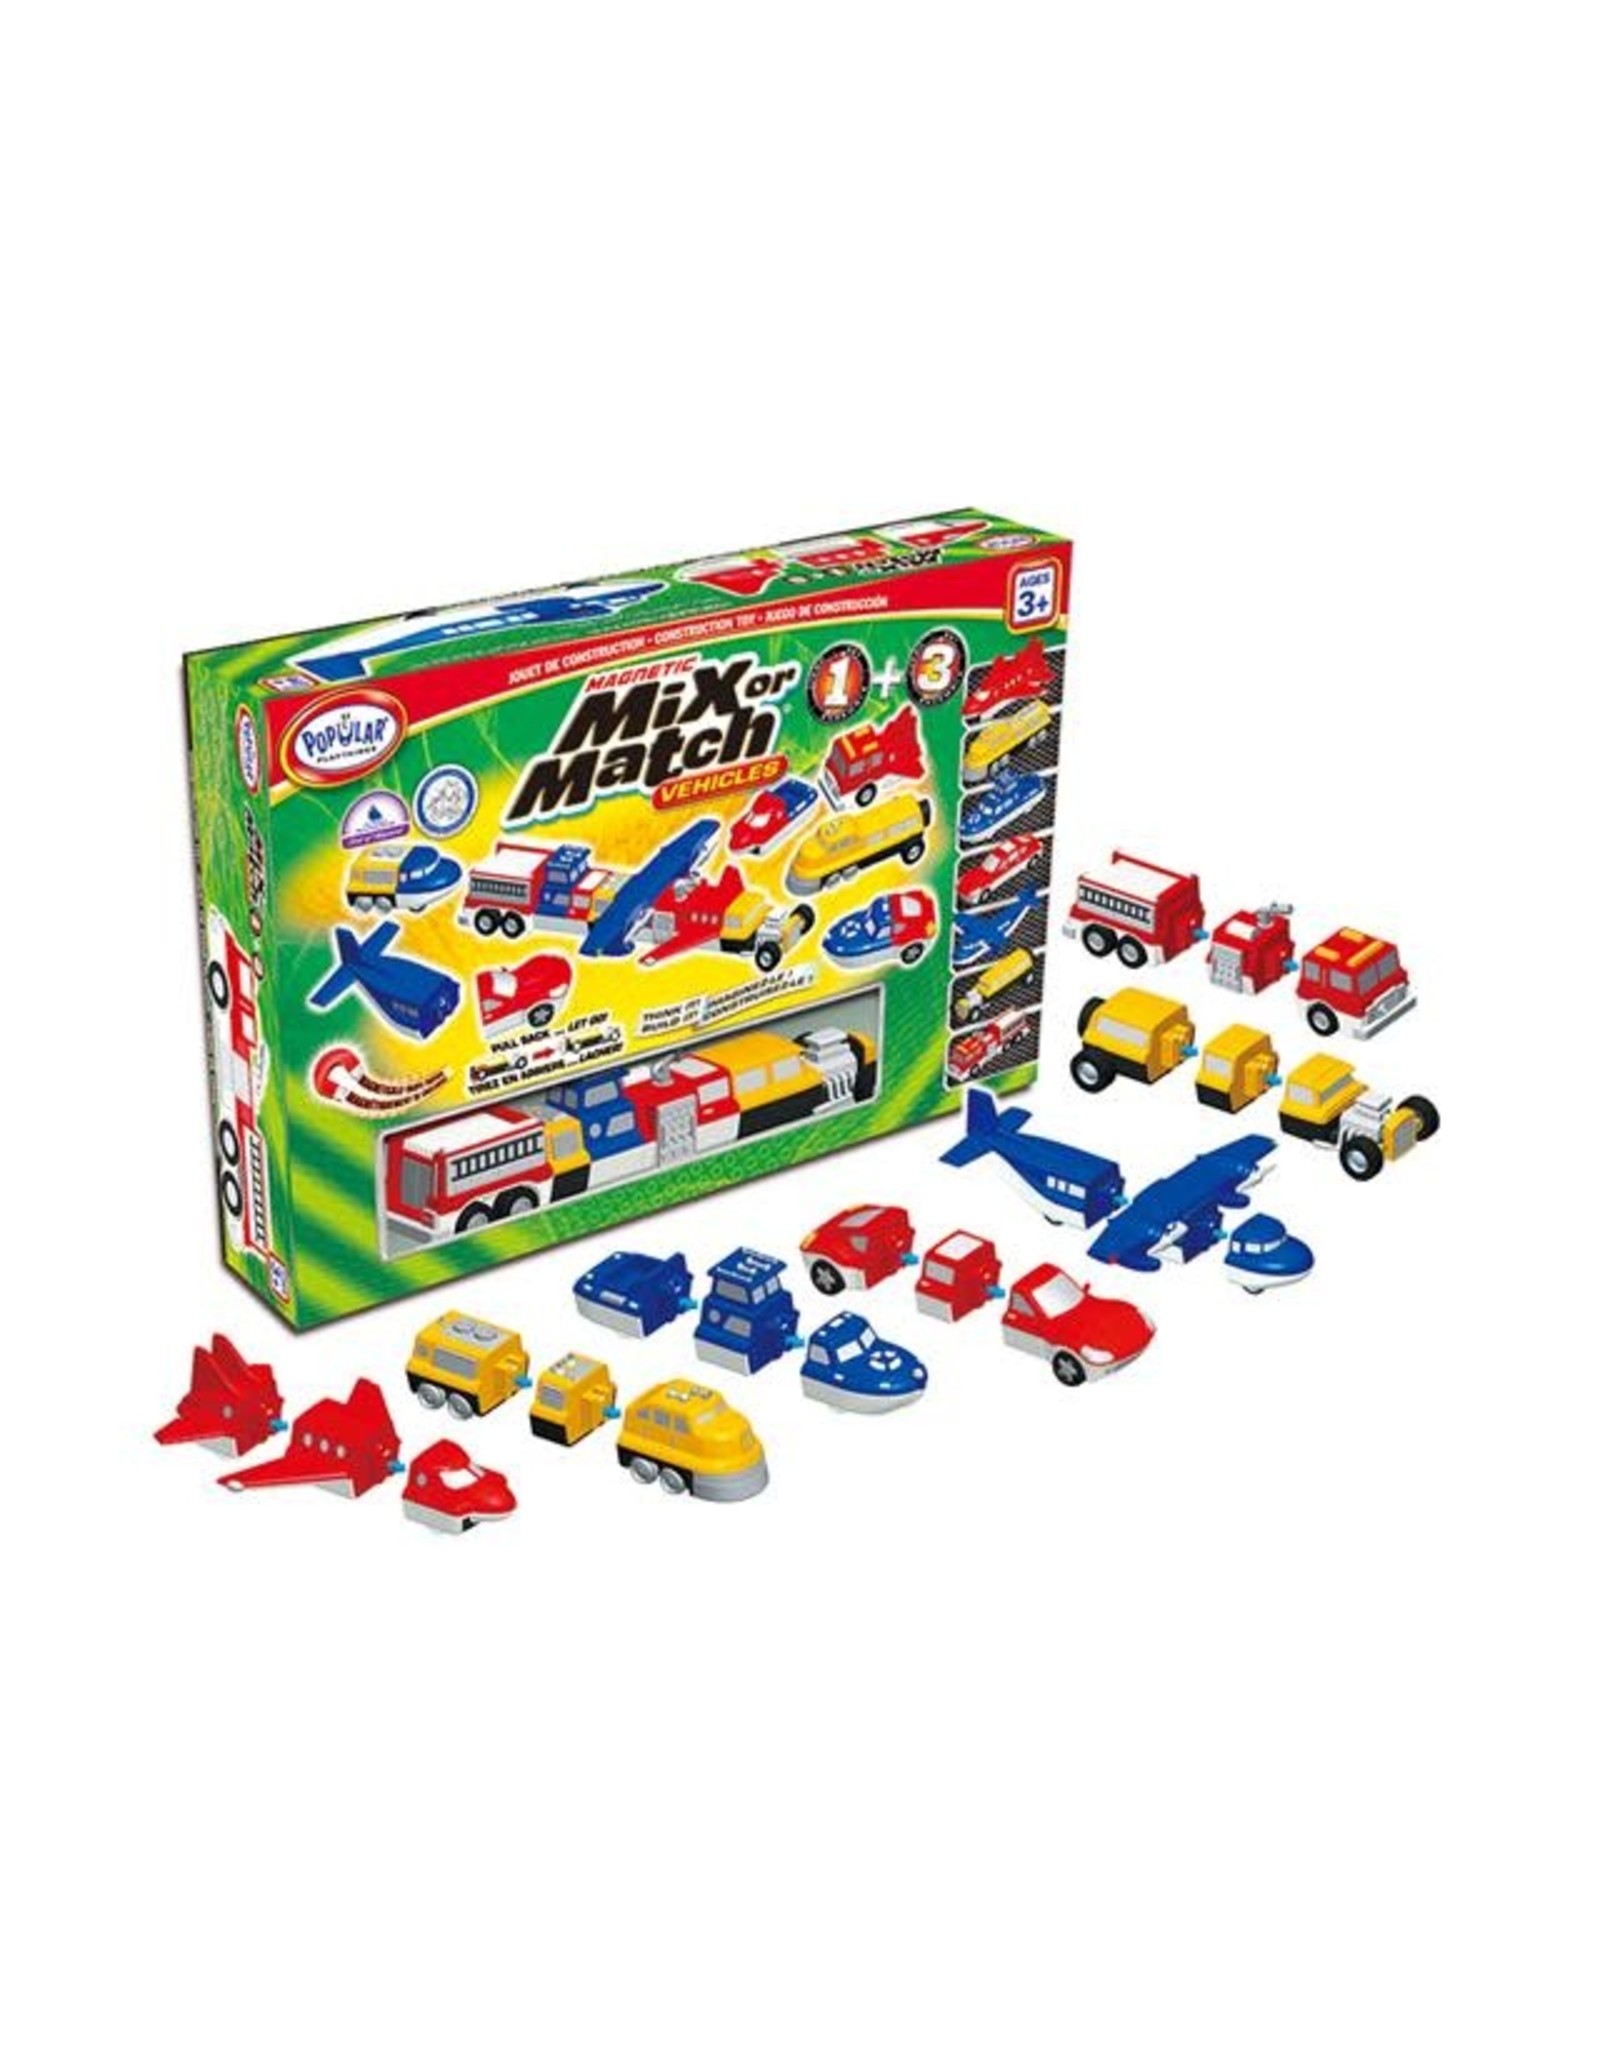 Popular playthings Magnetic Mix or Match - Vehicles